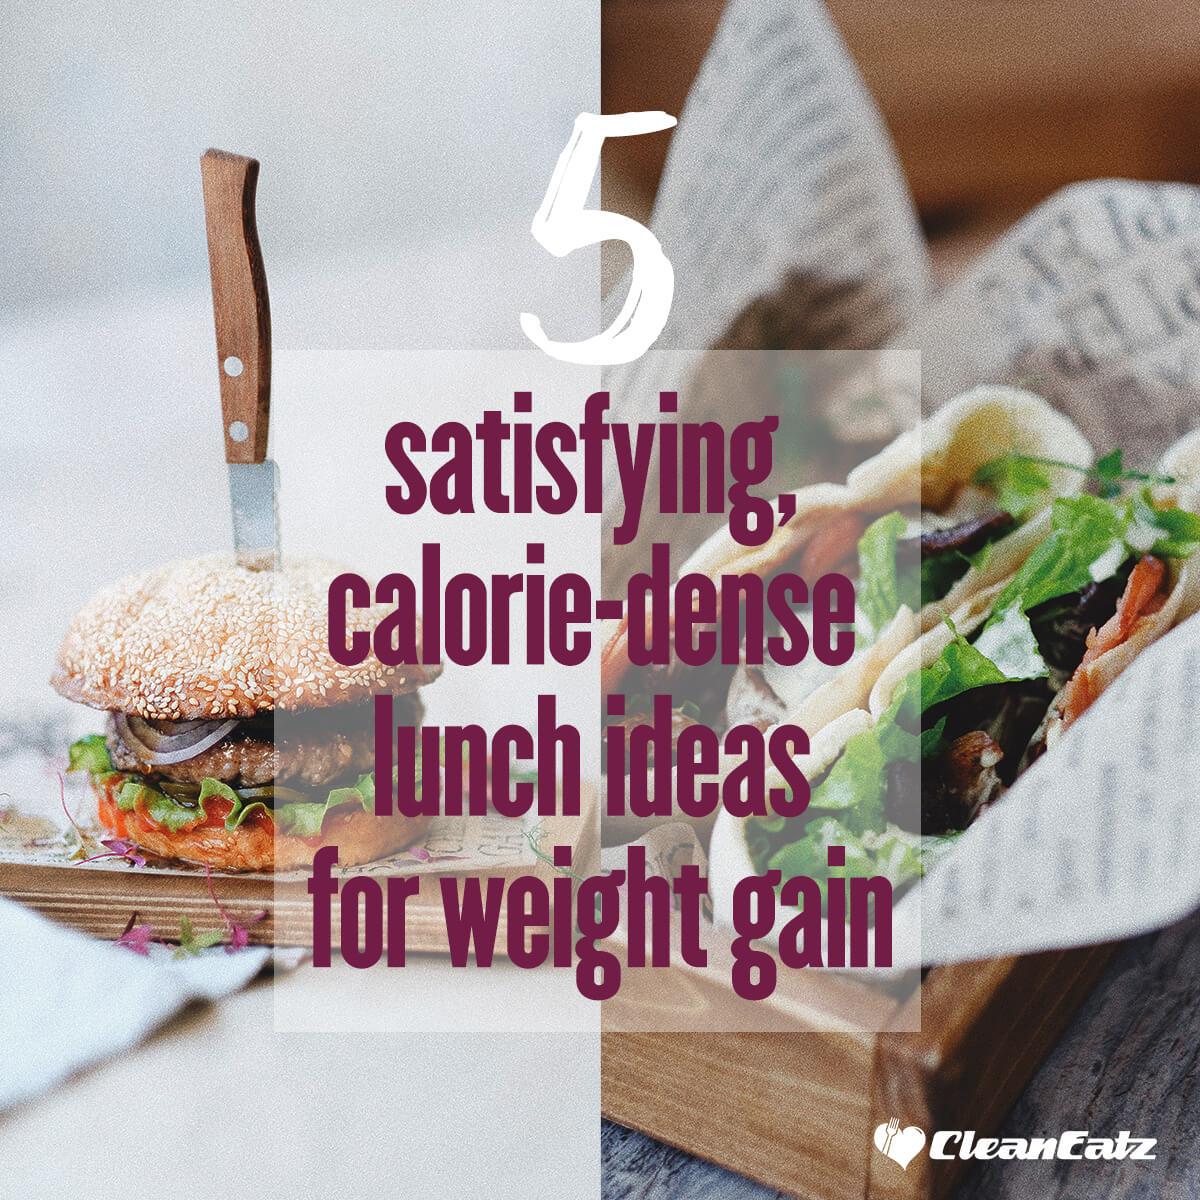 5 Satisfying, Calorie-Dense Foods for Weight Gain